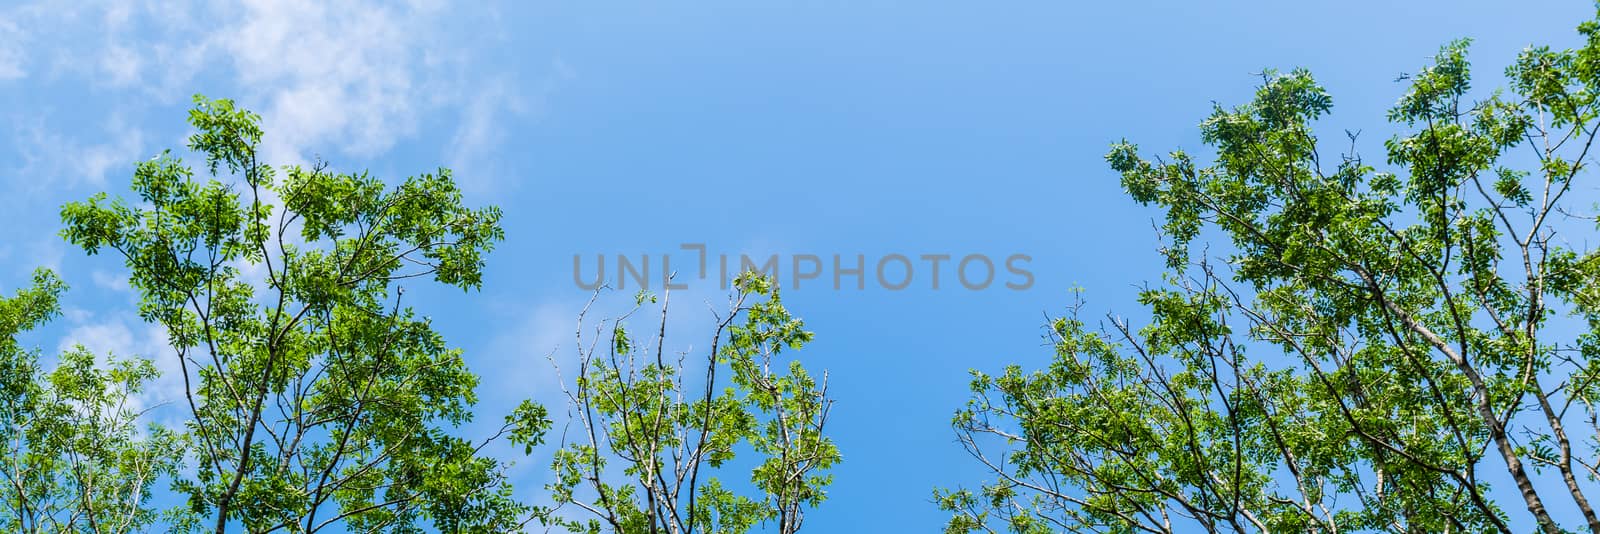 Panorama of tops of trees in forest against blue sky with clouds background by paddythegolfer